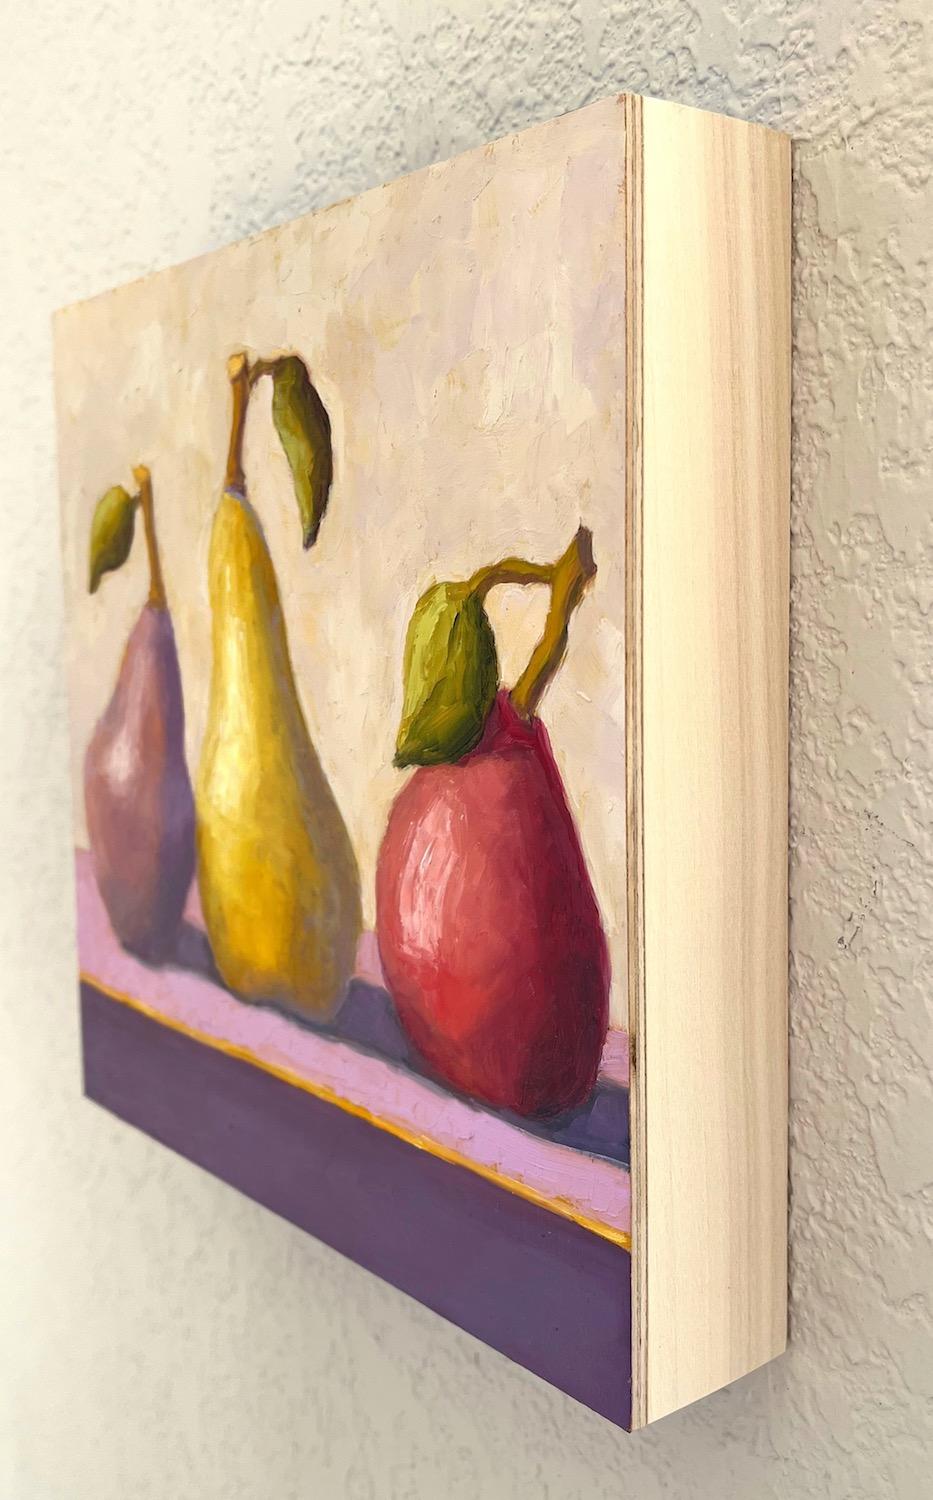 <p>Artist Comments<br />Three varieties of pears sit neatly aligned in a row. The soft light unveils their plump forms through delicate shadows. The balance between color, light, and shadow enhances the visual appeal of the composition.</p><br